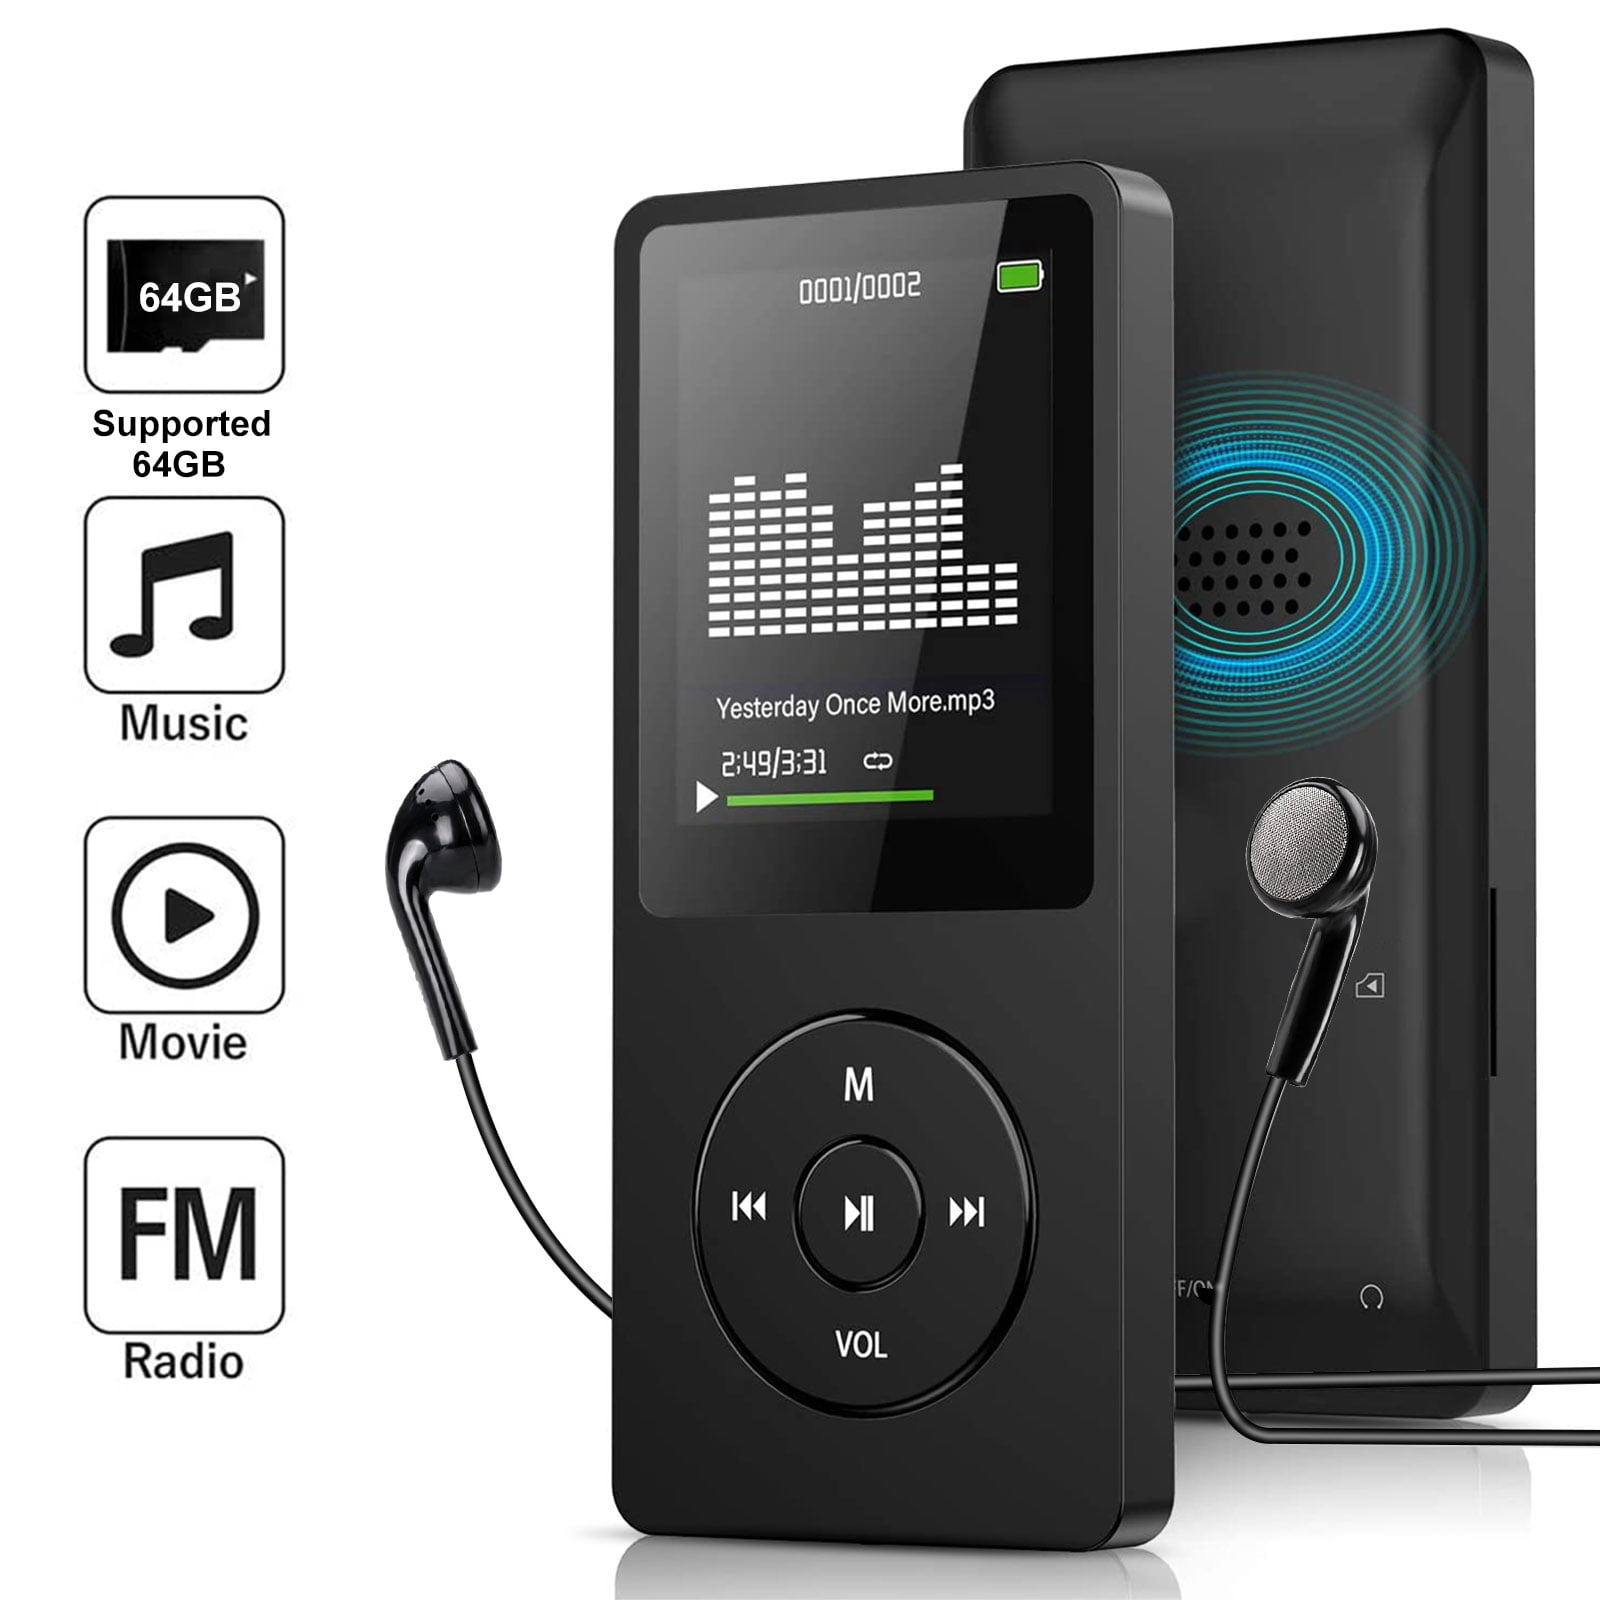 MP3 Player, Portable 64GB SD Card Support MP3 Player with HiFi Lossless ...